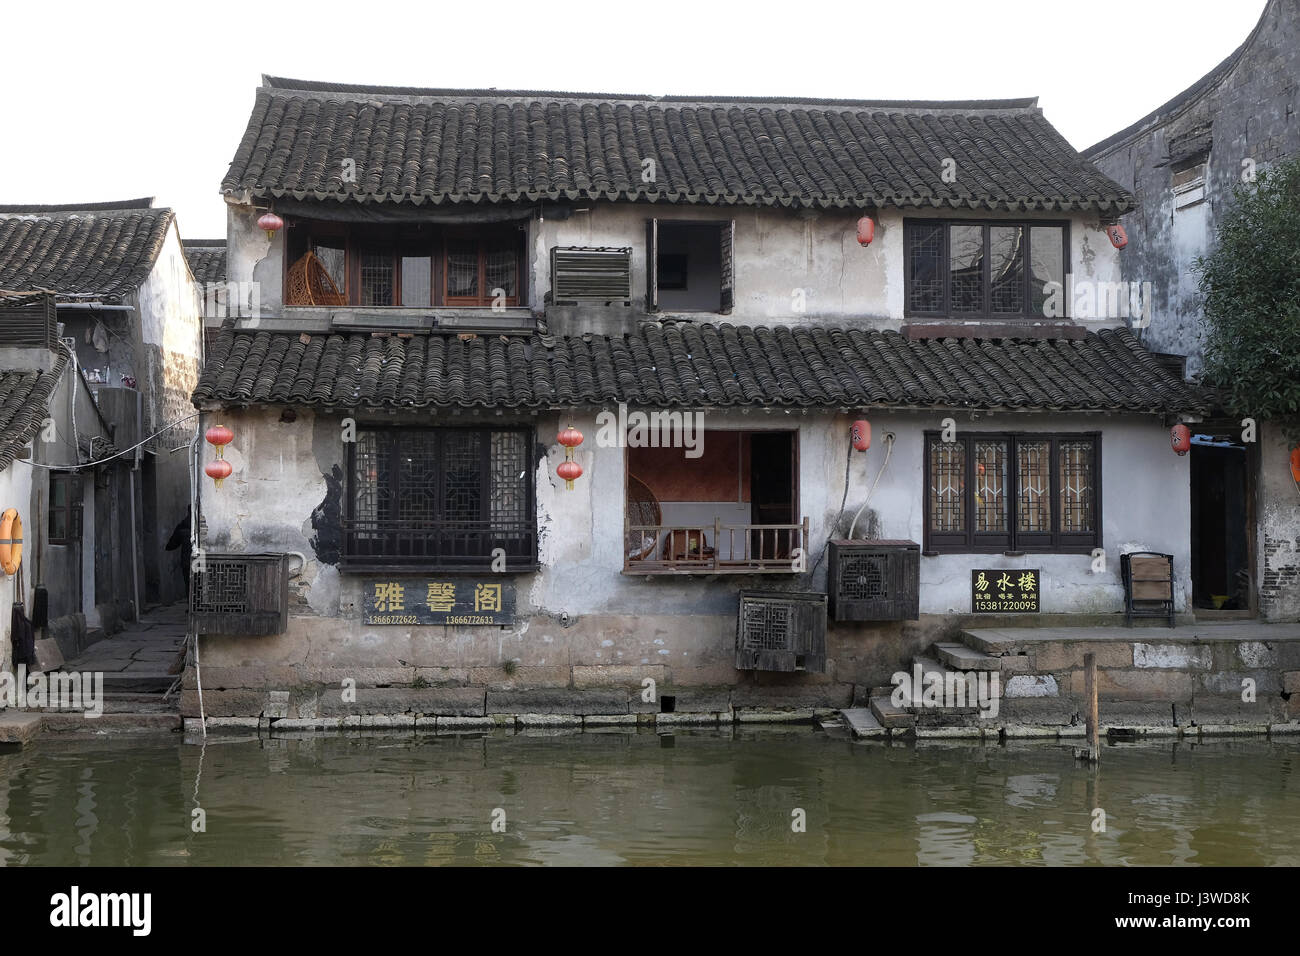 The Chinese architecture and buildings lining the water canals to Xitang town in Zhejiang Province, China, February 20, 2016. Stock Photo